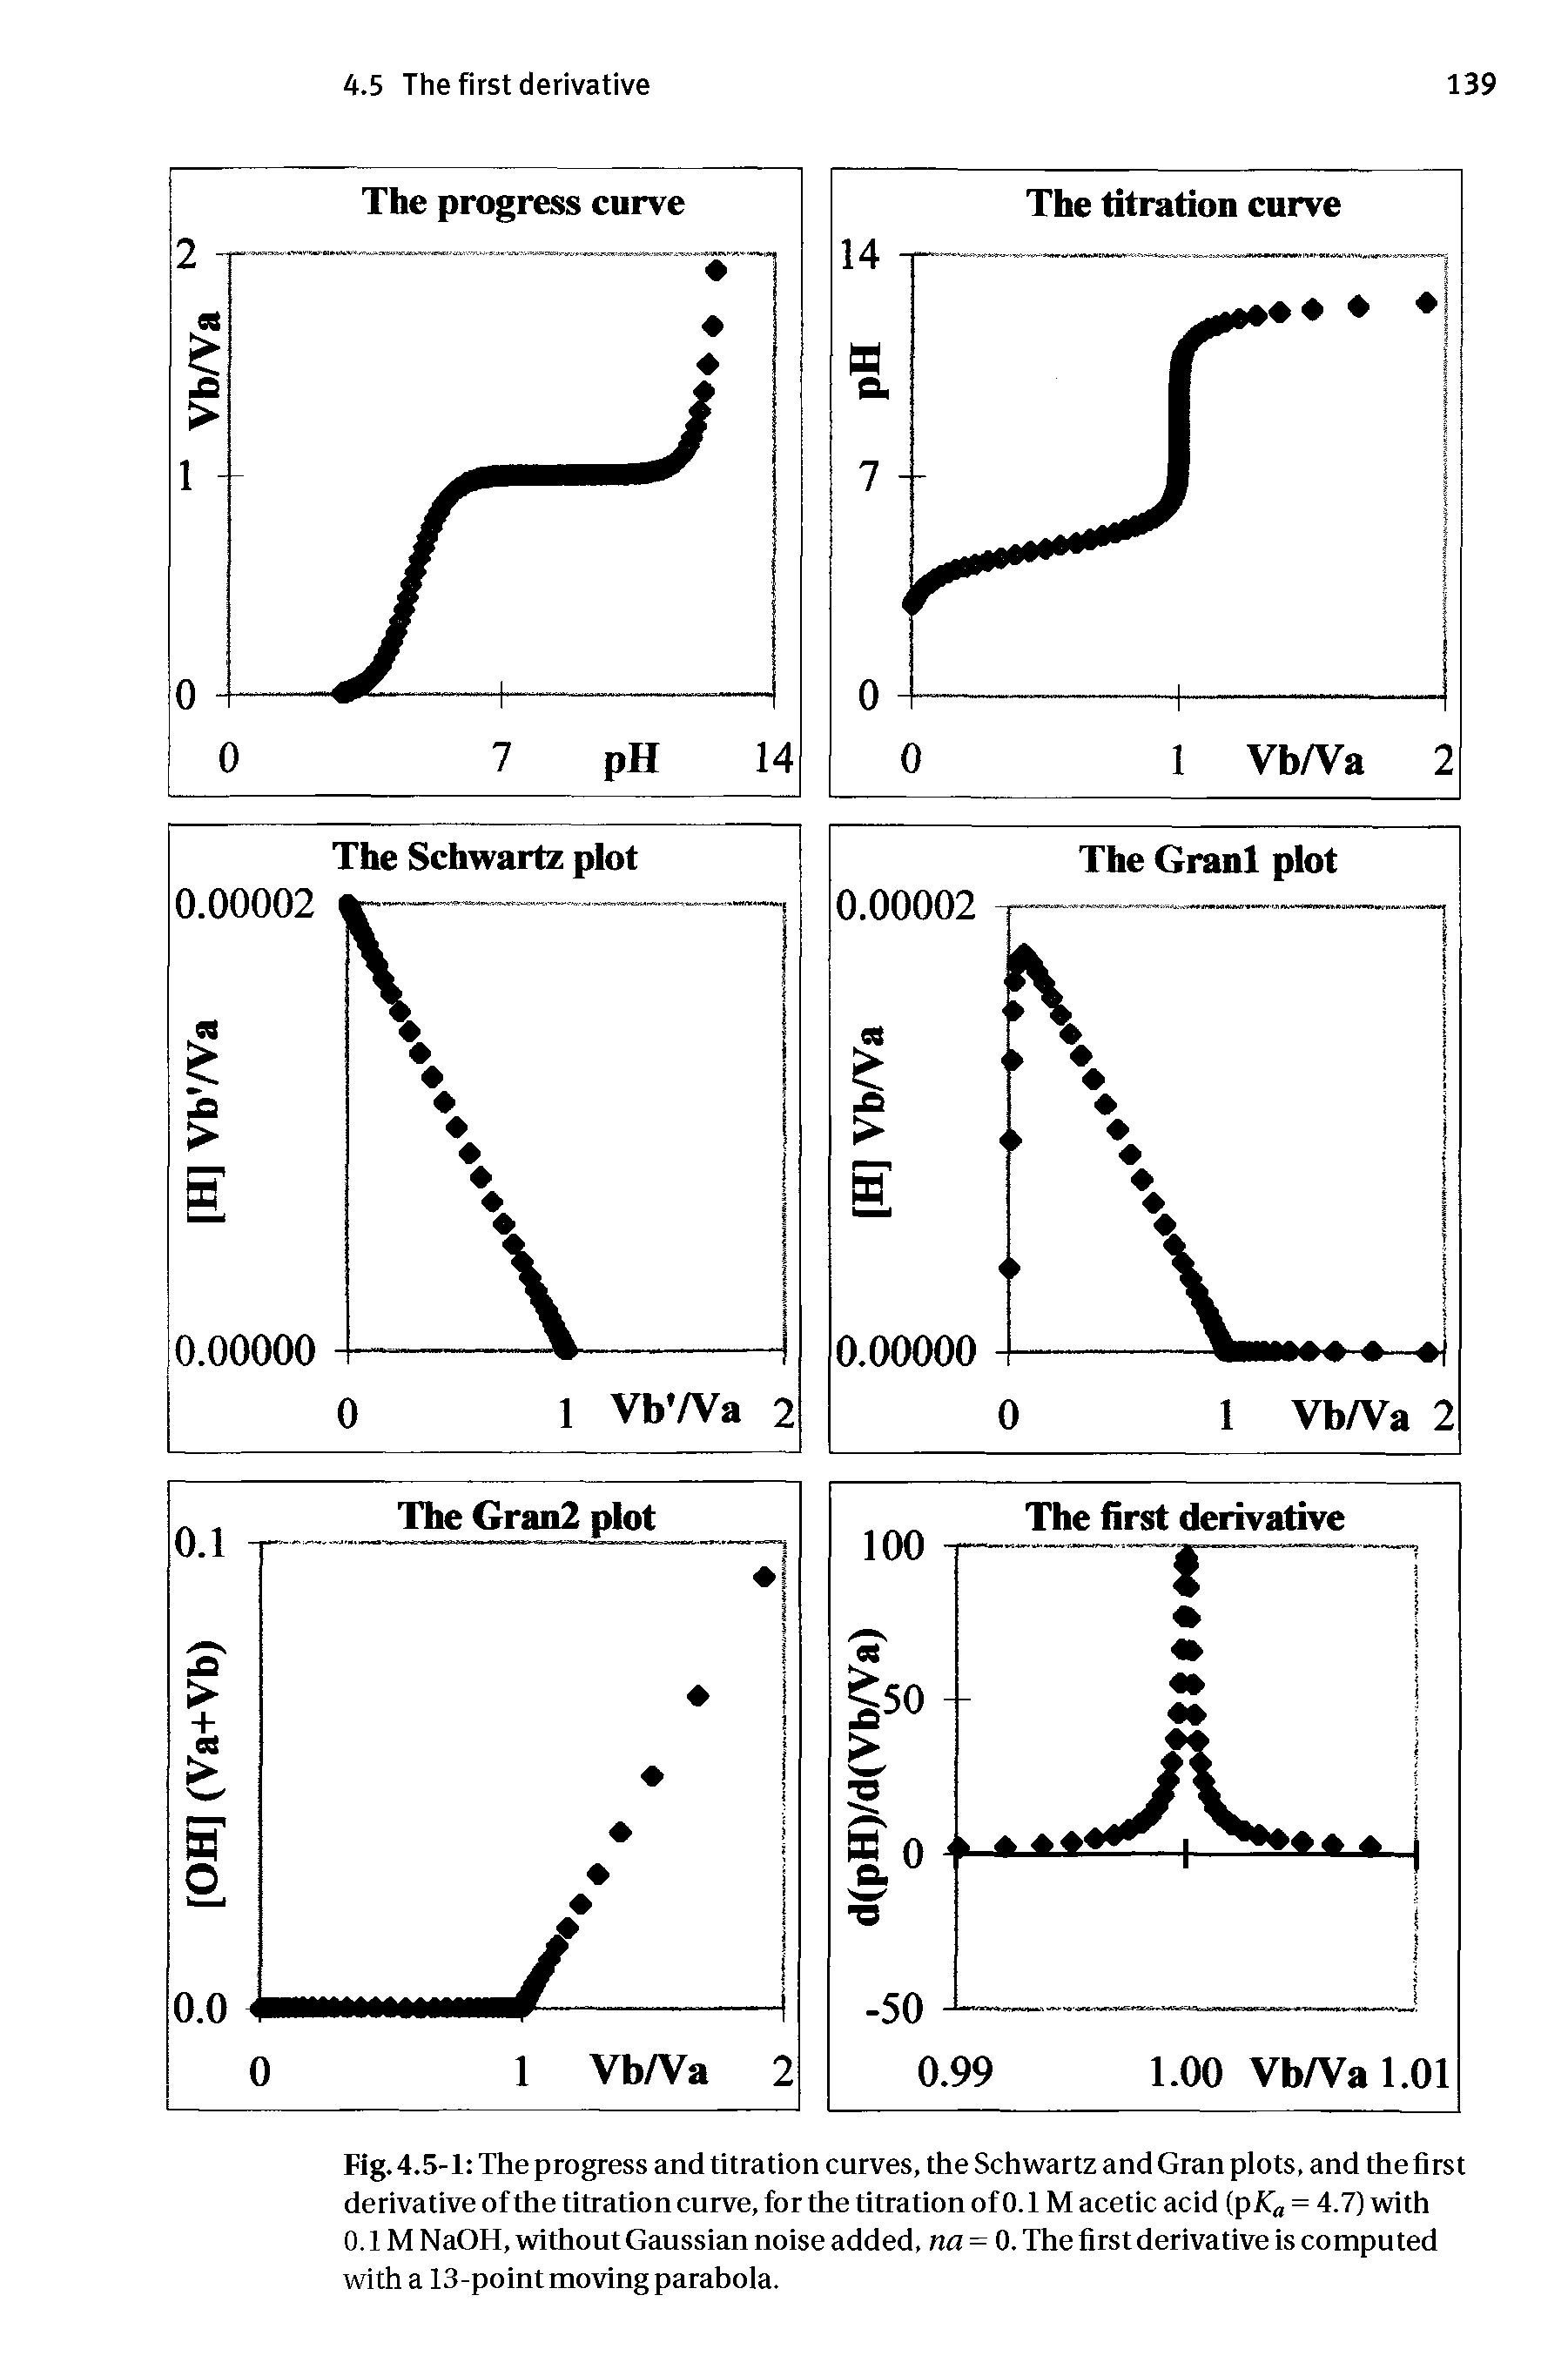 Fig. 4.5-1 The progress and titration curves, the Schwartz and Gran plots, and the first derivative of the titration curve, for the titration of 0.1 M acetic acid (p Ka = 4.7) with 0.1 M NaOH, without Gaussian noise added, na = 0. The first derivative is computed with a 13-point moving parabola.